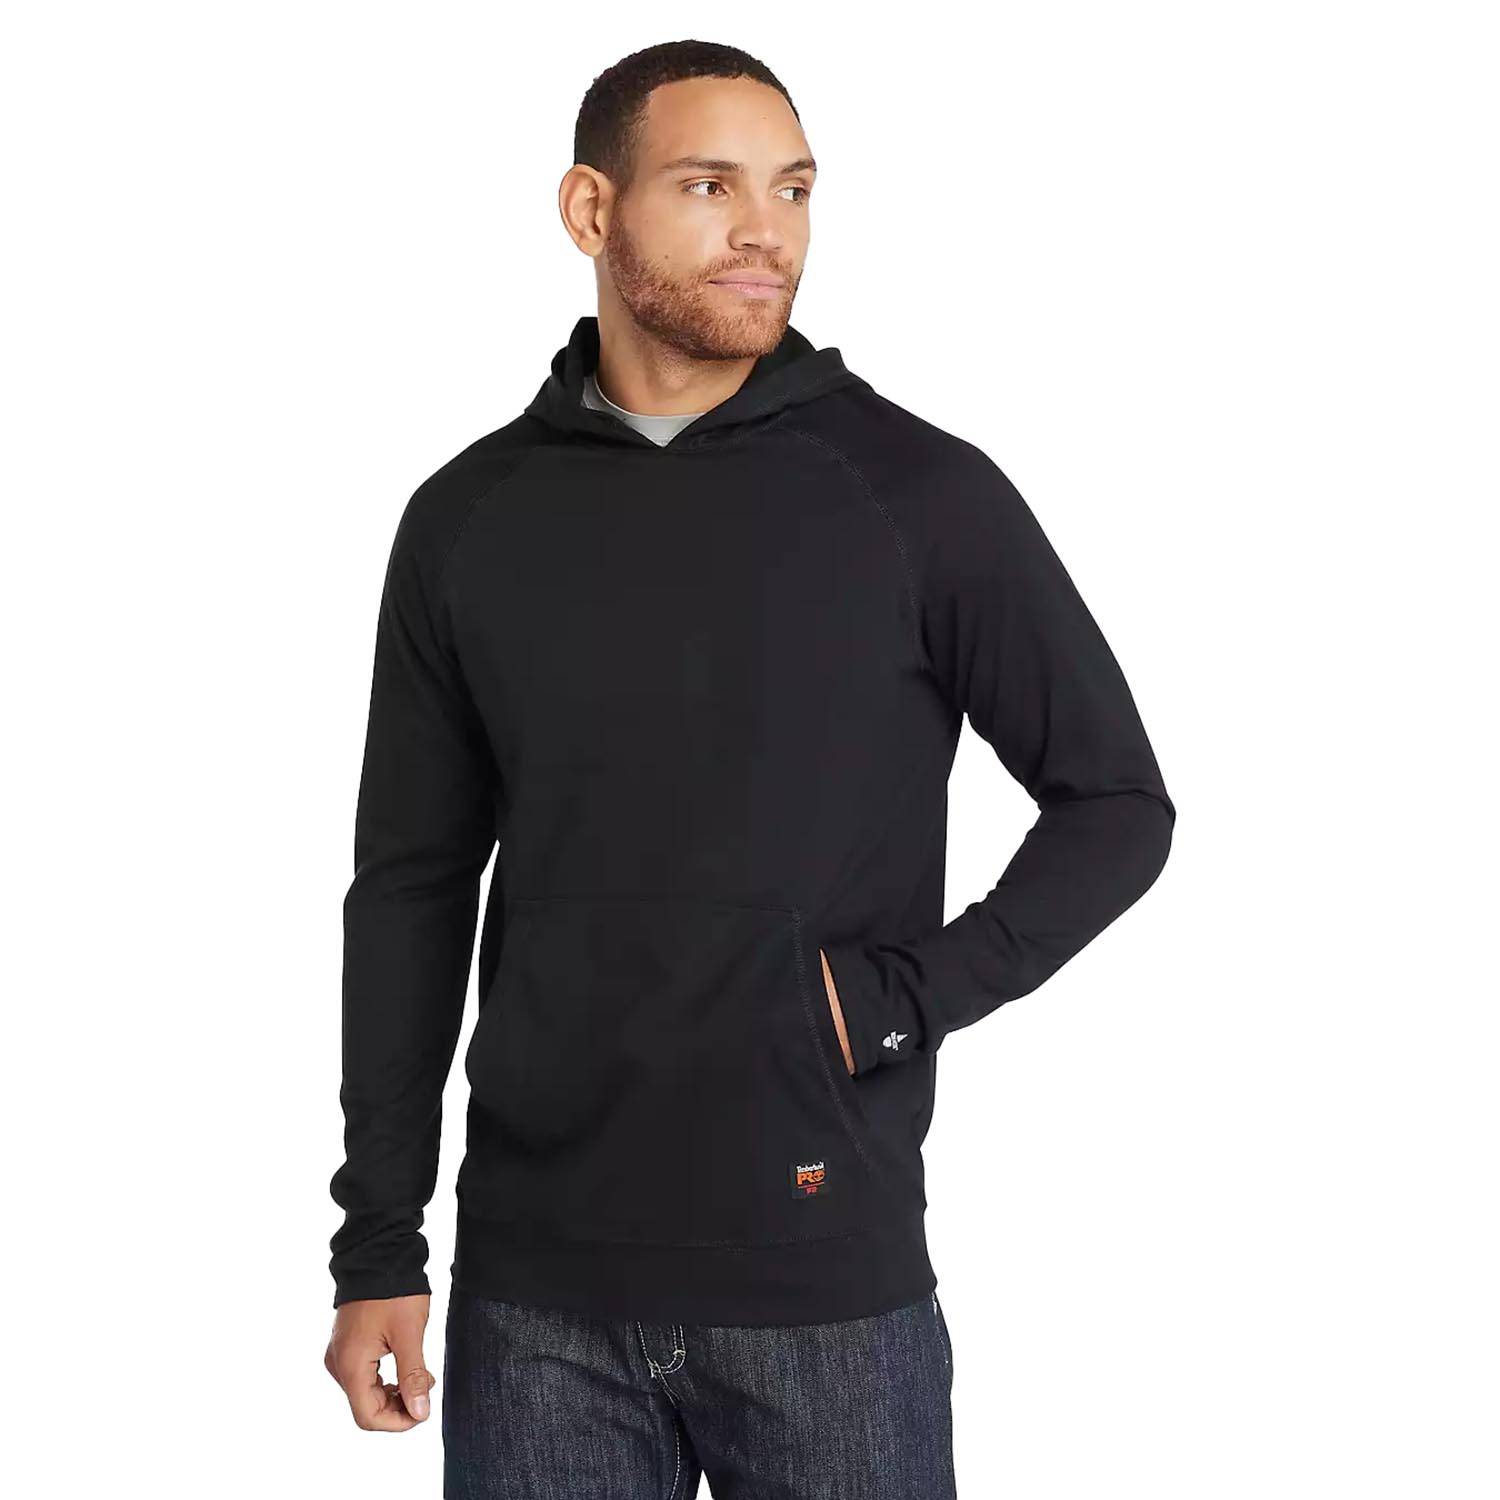 TIMBERLAND PRO COTTON CORE FLAME RESISTANT HOODIE